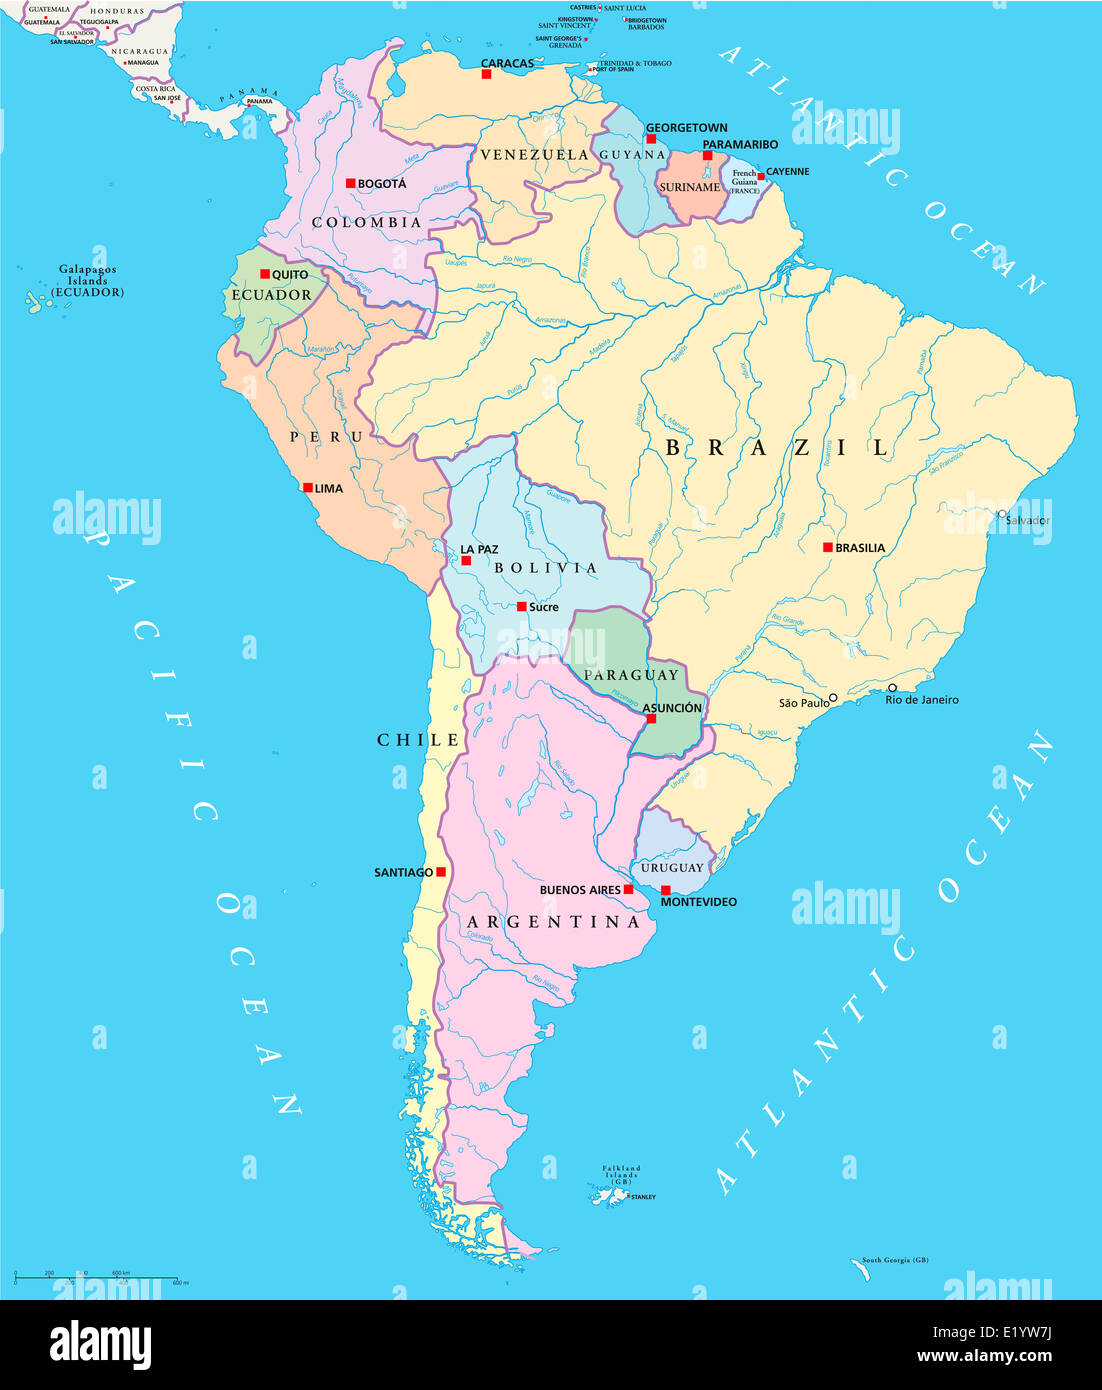 south america lakes map South America Single States Map With Capitals National Borders Stock Photo Alamy south america lakes map